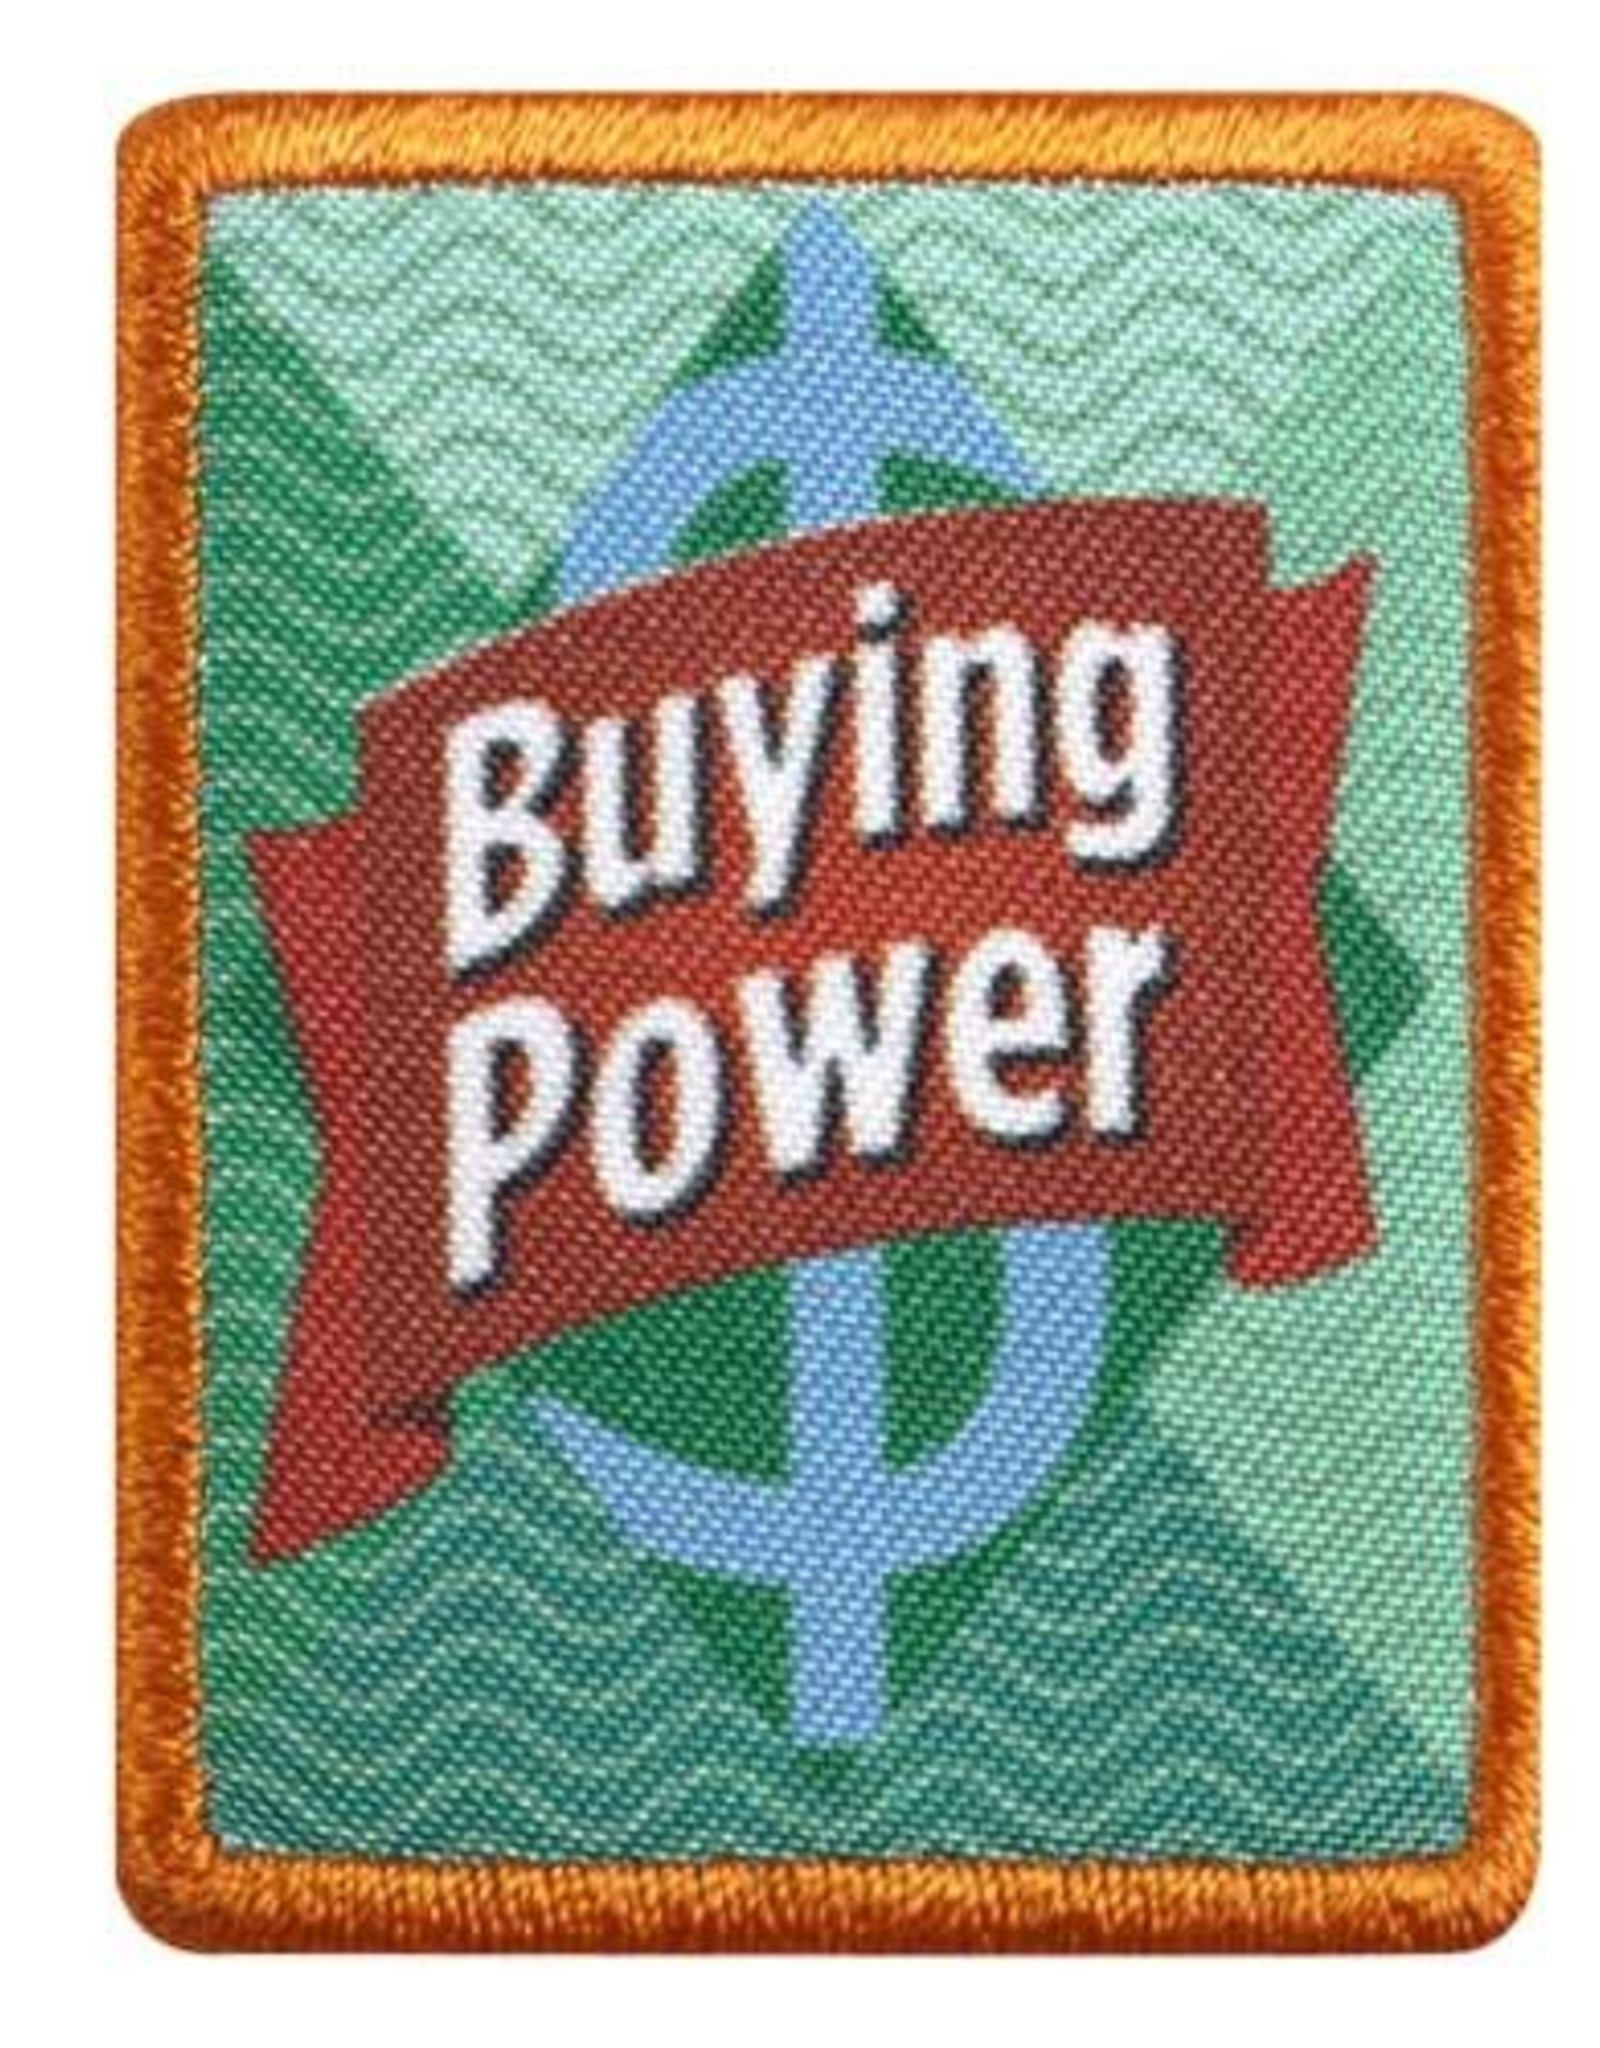 GIRL SCOUTS OF THE USA Senior Buying Power Badge